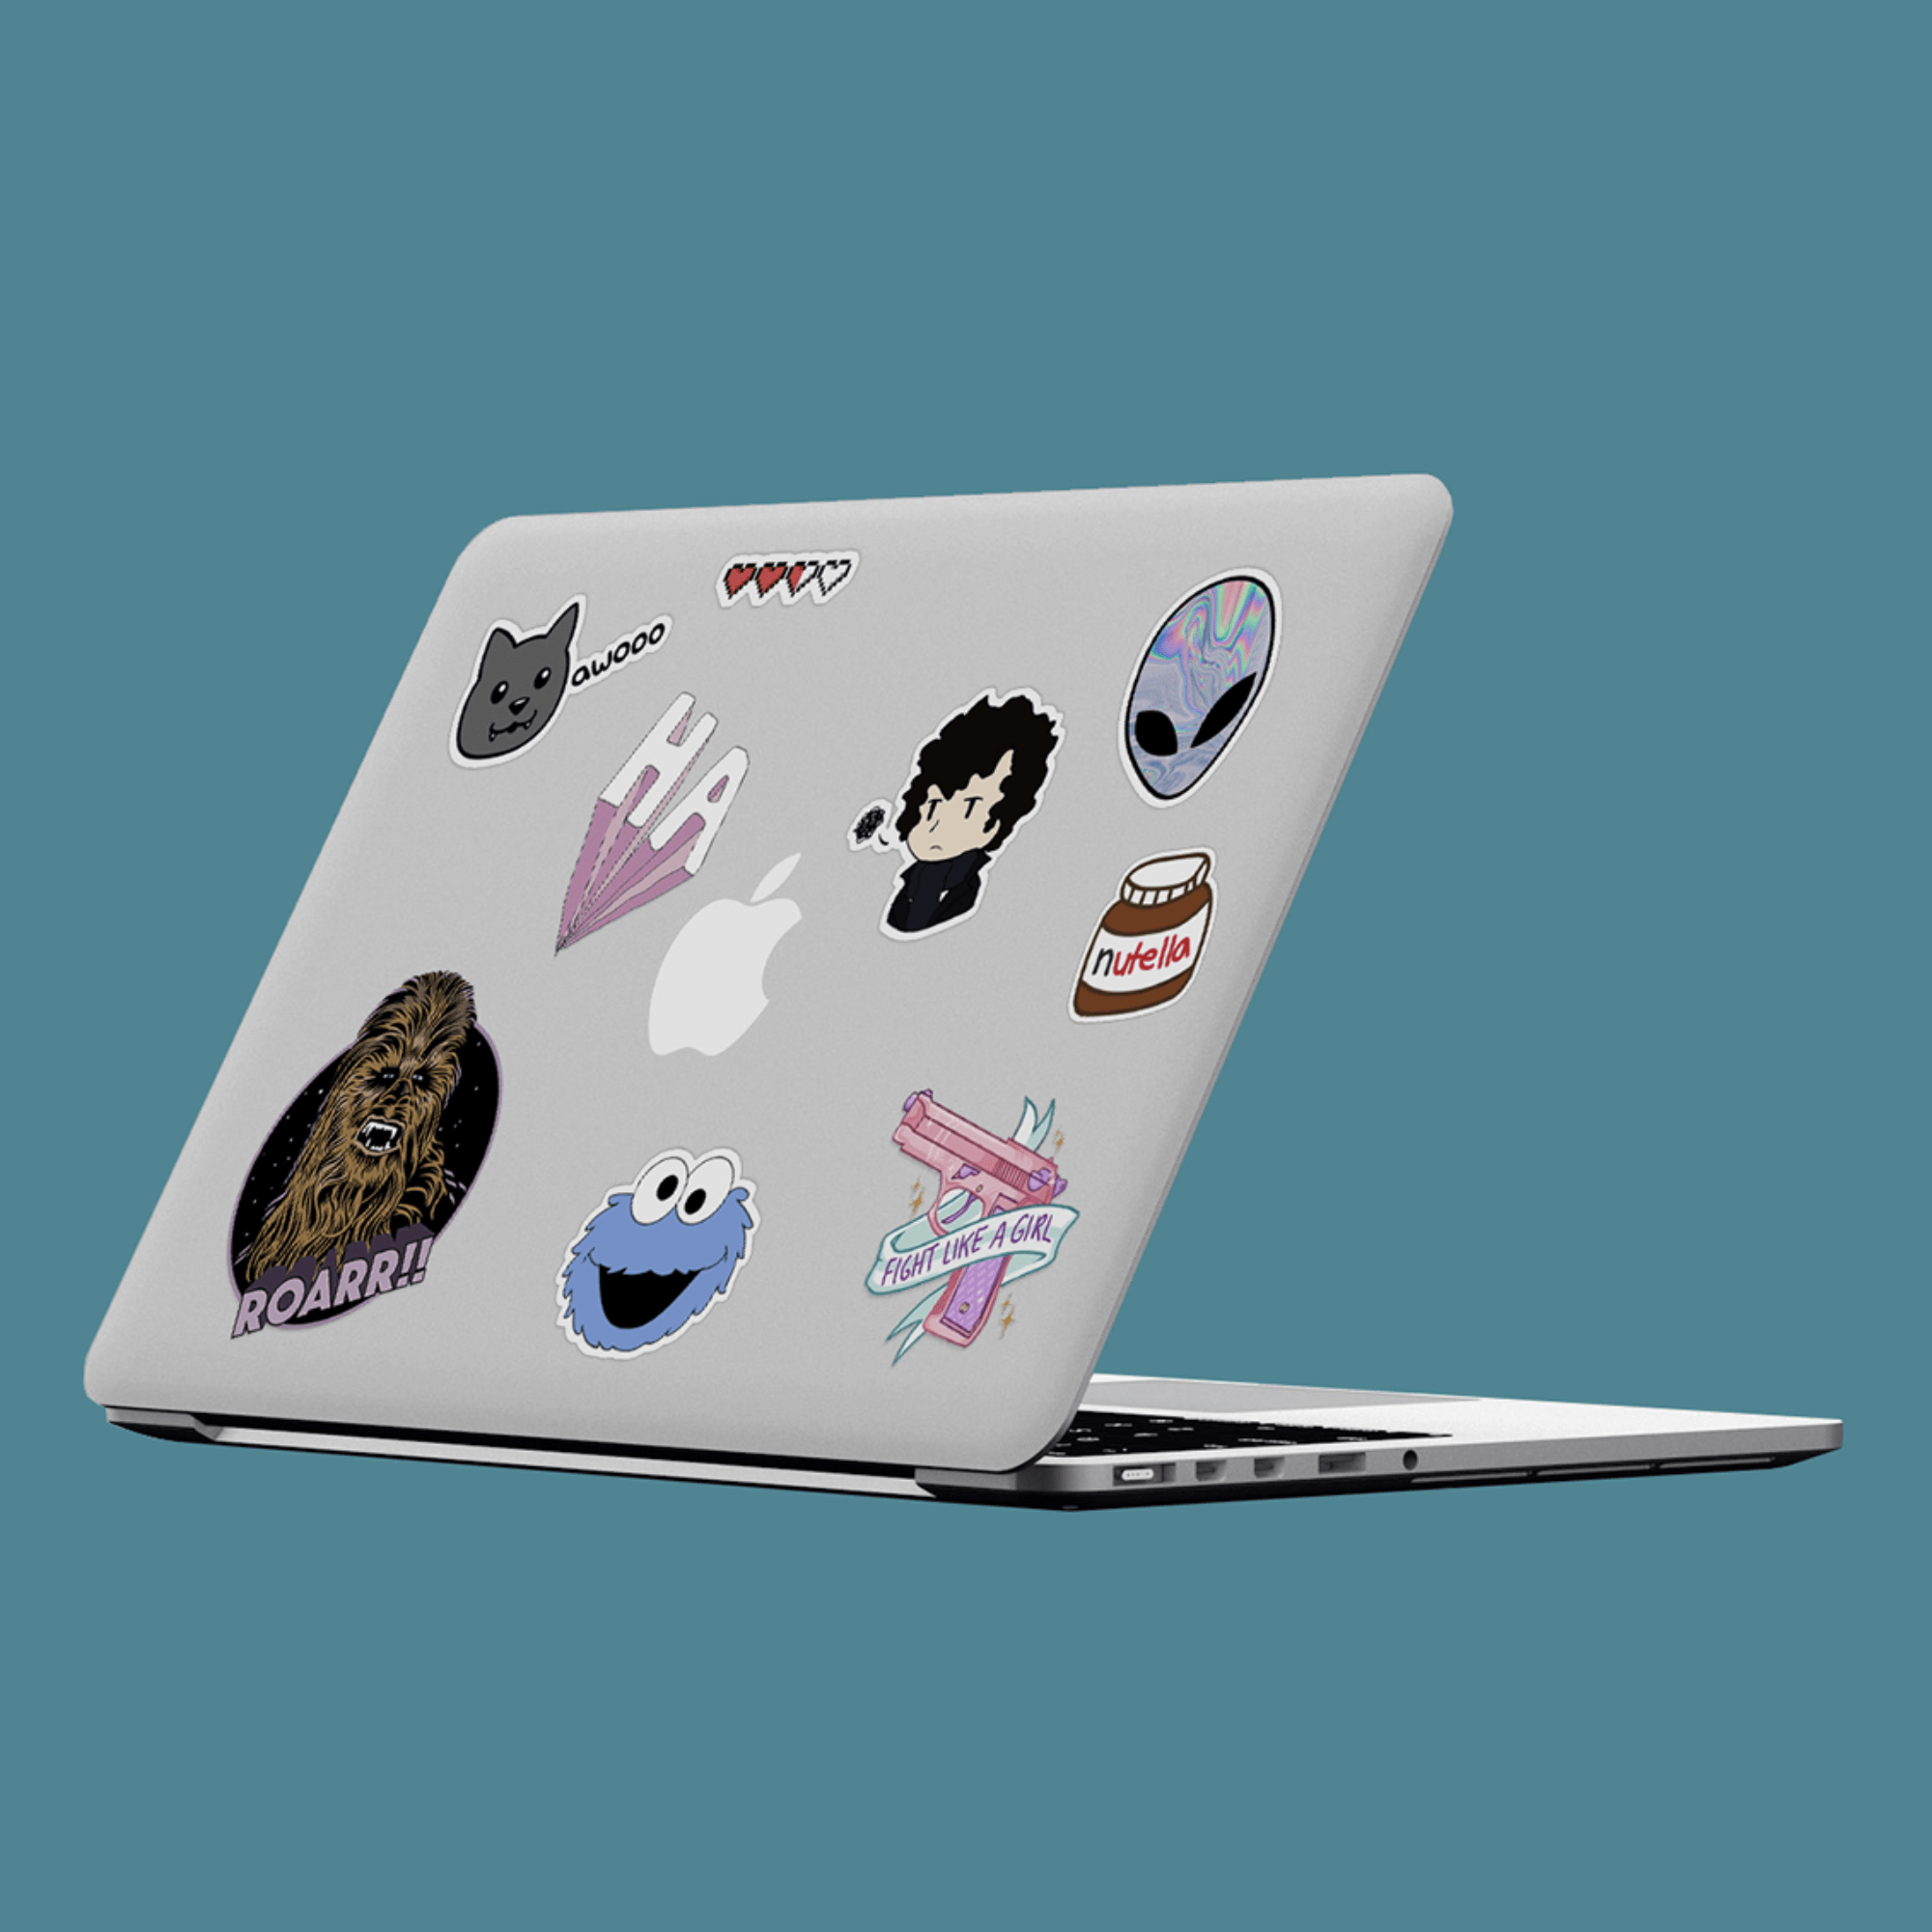 A collage of various laptop stickers.